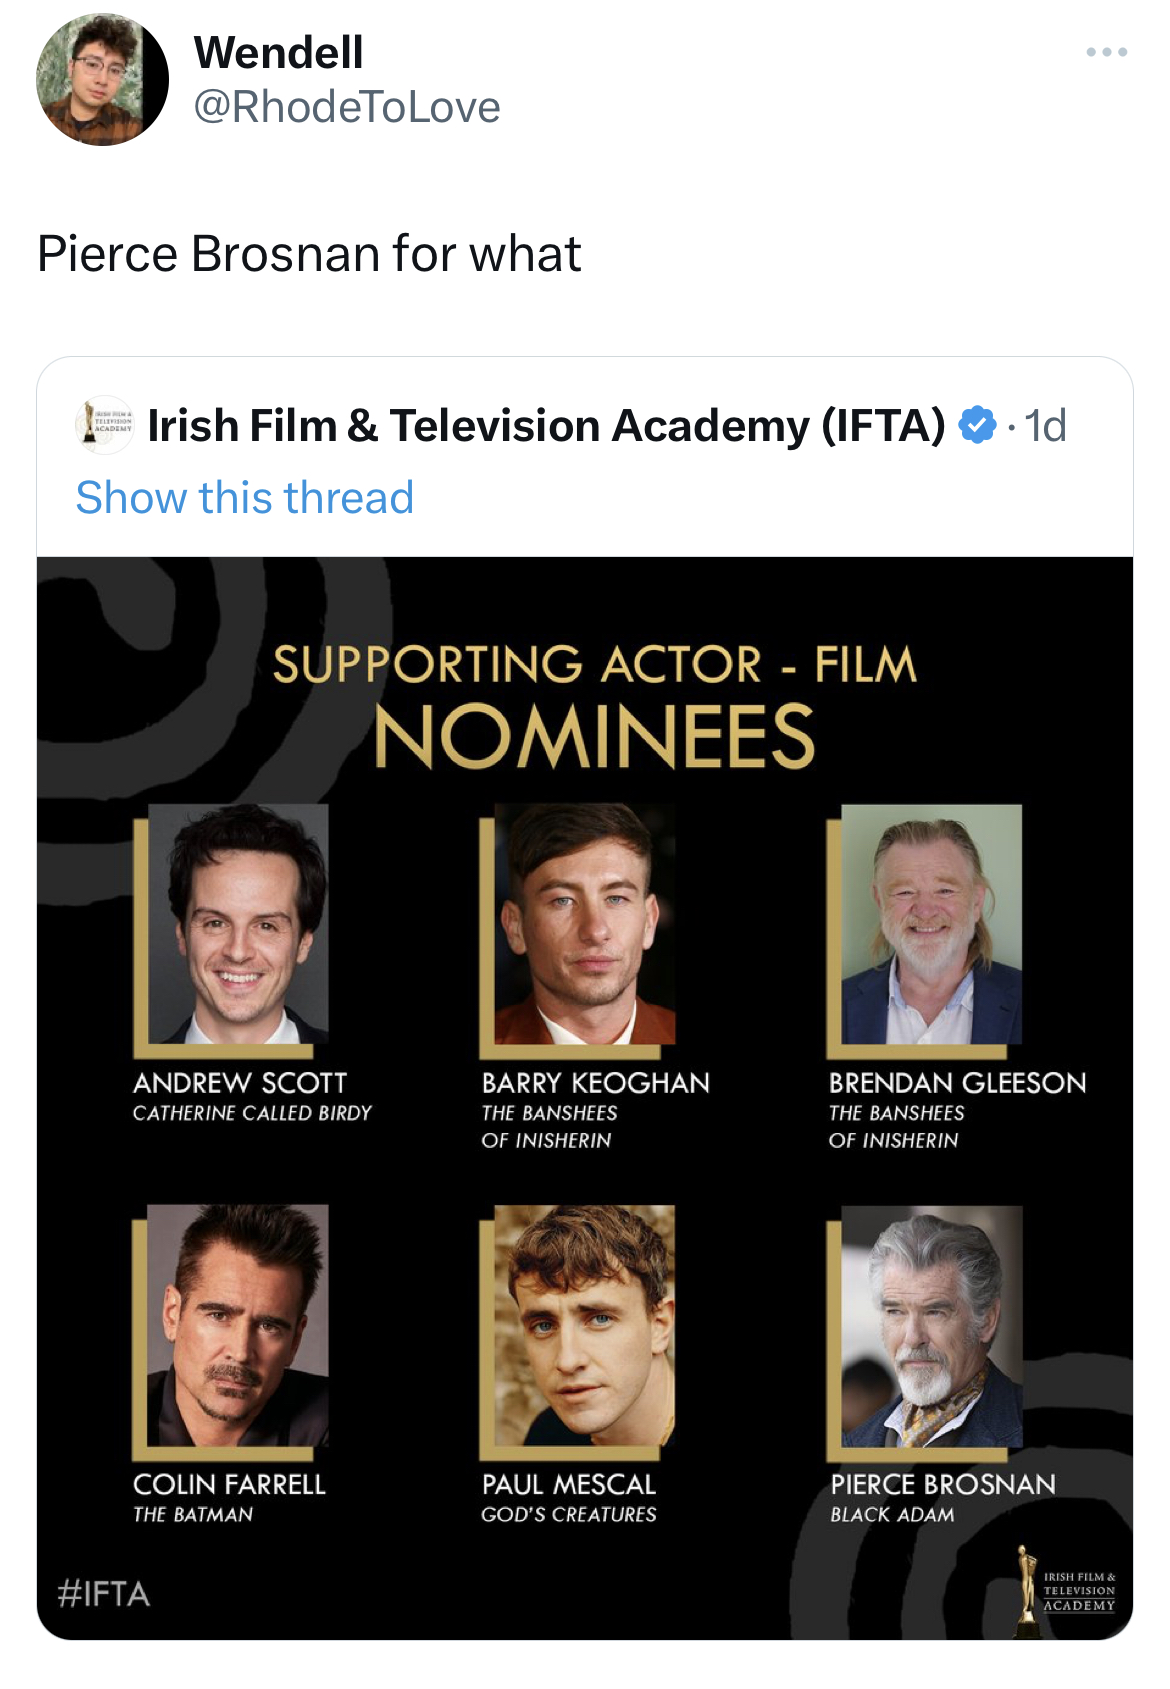 funny tweets - arches wide awake - Wendell Pierce Brosnan for what Irish Film & Television Academy Ifta1d Show this thread Supporting Actor Film Nominees Andrew Scott Catherine Called Birdy Colin Farrell The Batman Barry Keoghan The Banshees Of Inishrin P